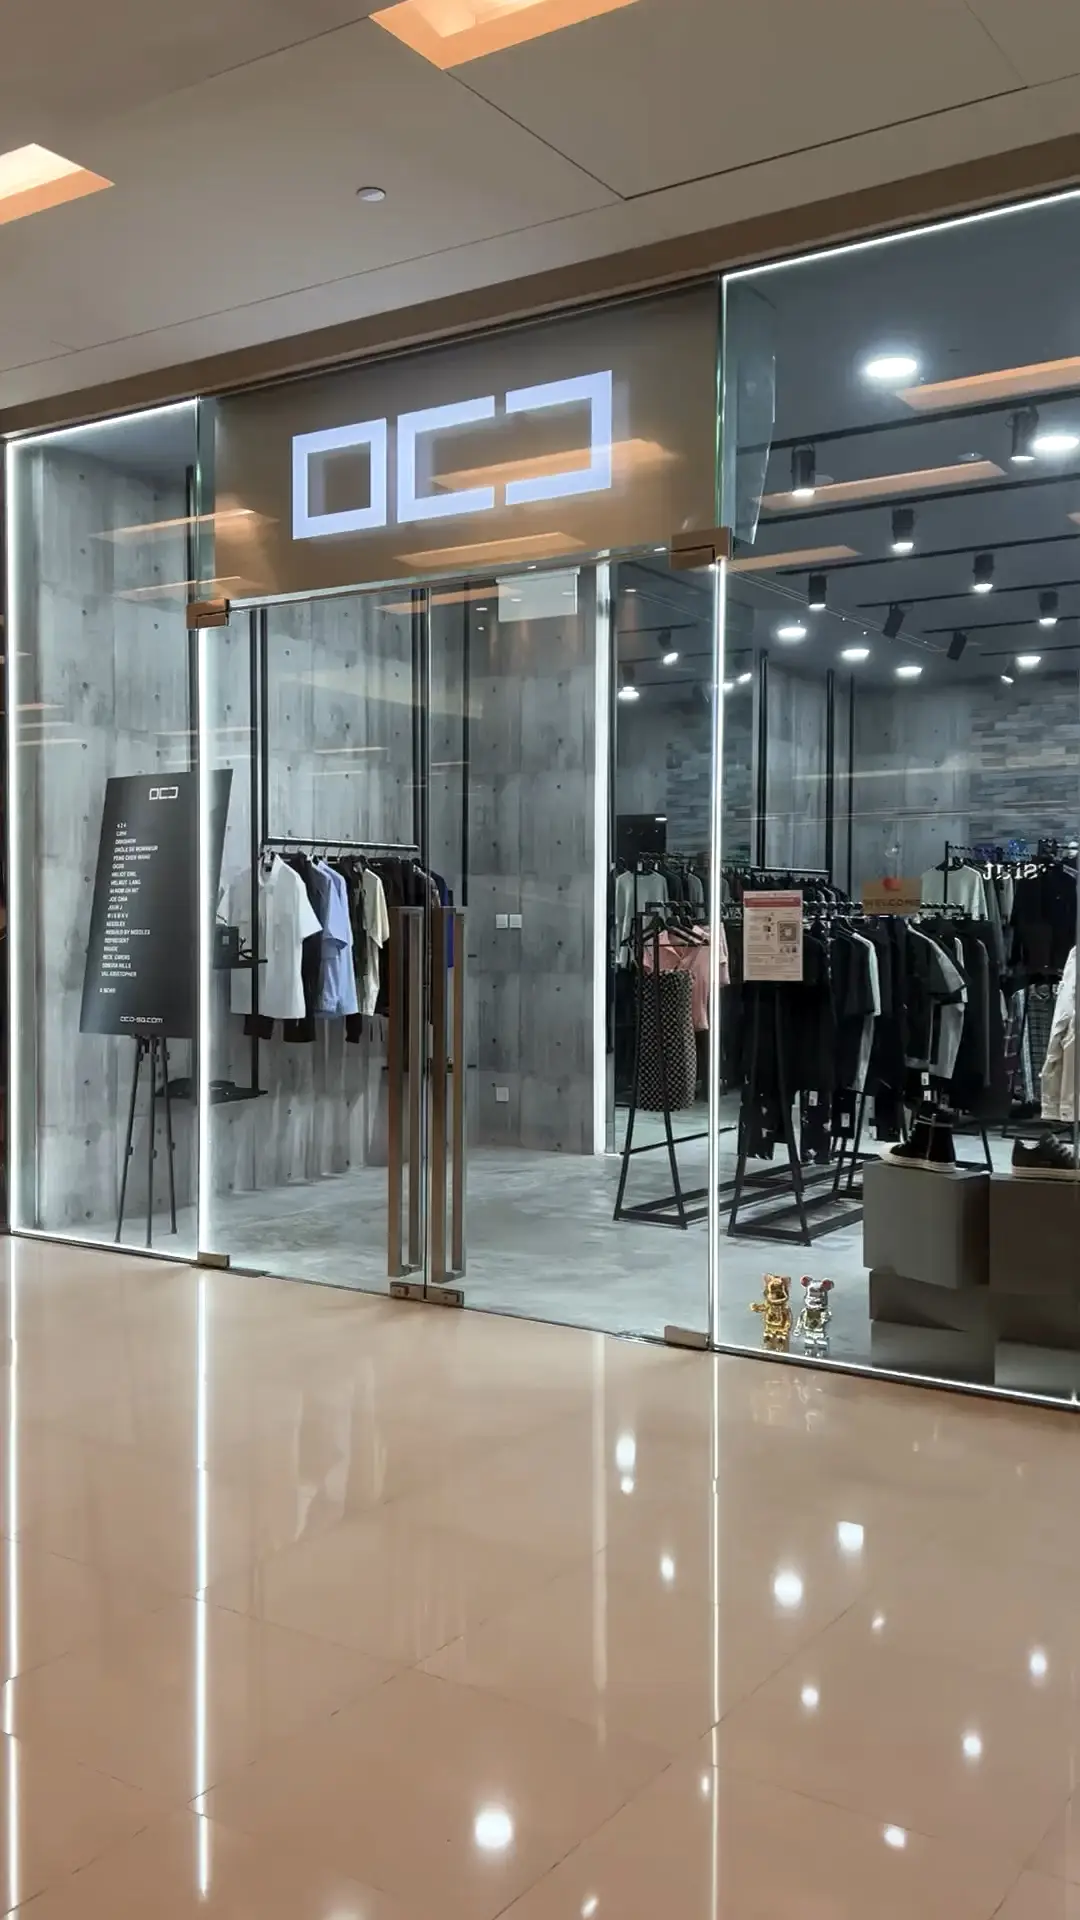 Korean Exquisite Lifestyle Concept Store, Daily&Co in Singapore